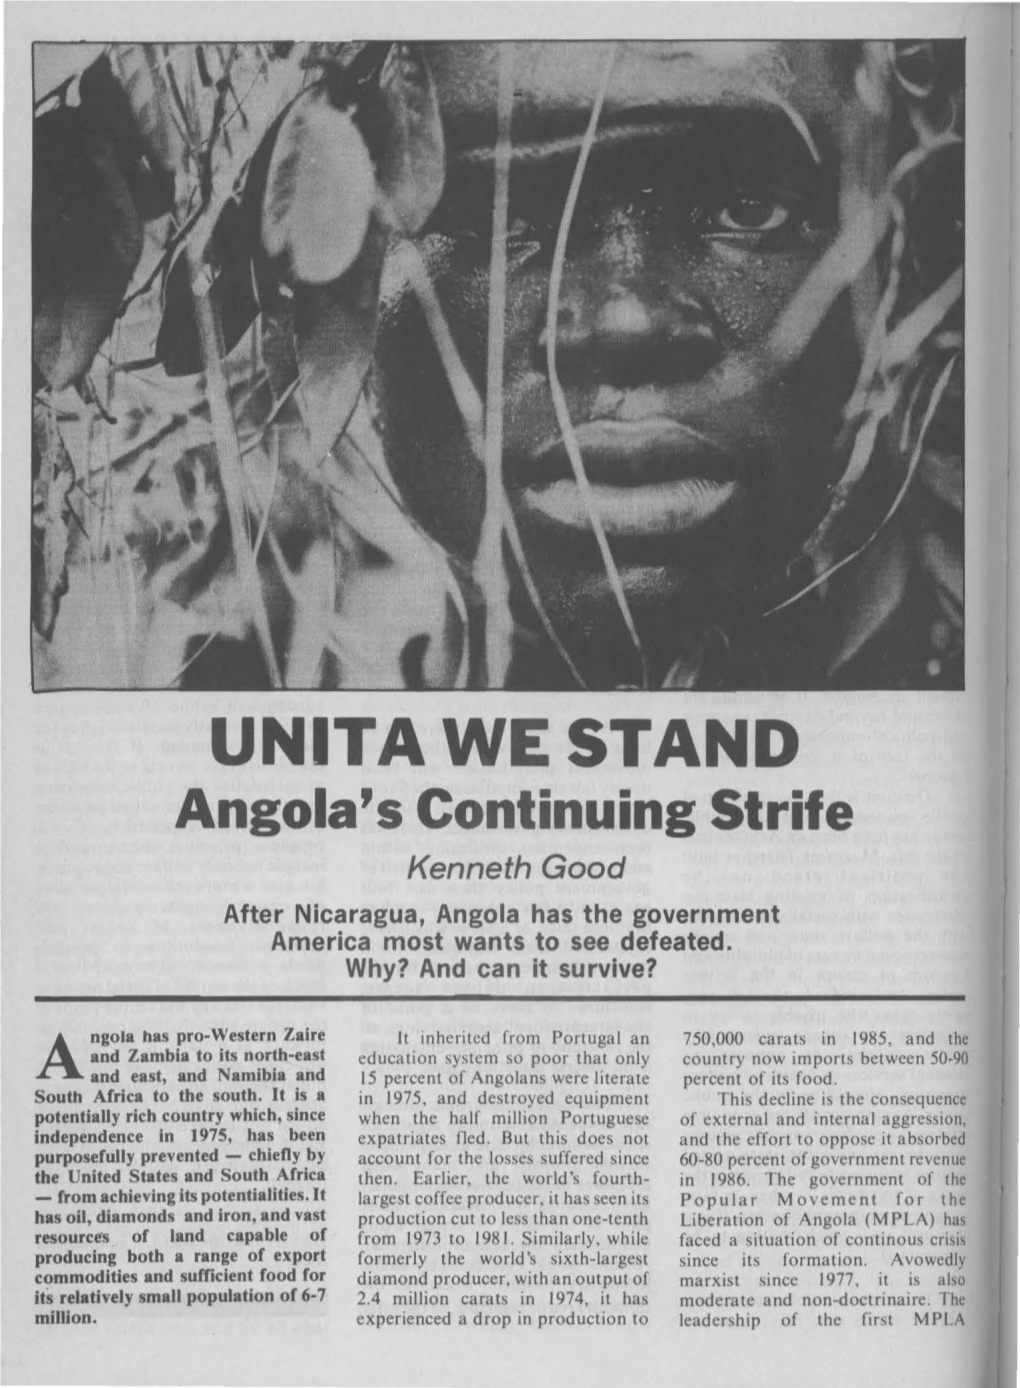 UNITA WE STAND Angola's Continuing Strife Kenneth Good After Nicaragua, Angola Has the Government America Most Wants to See Defeated